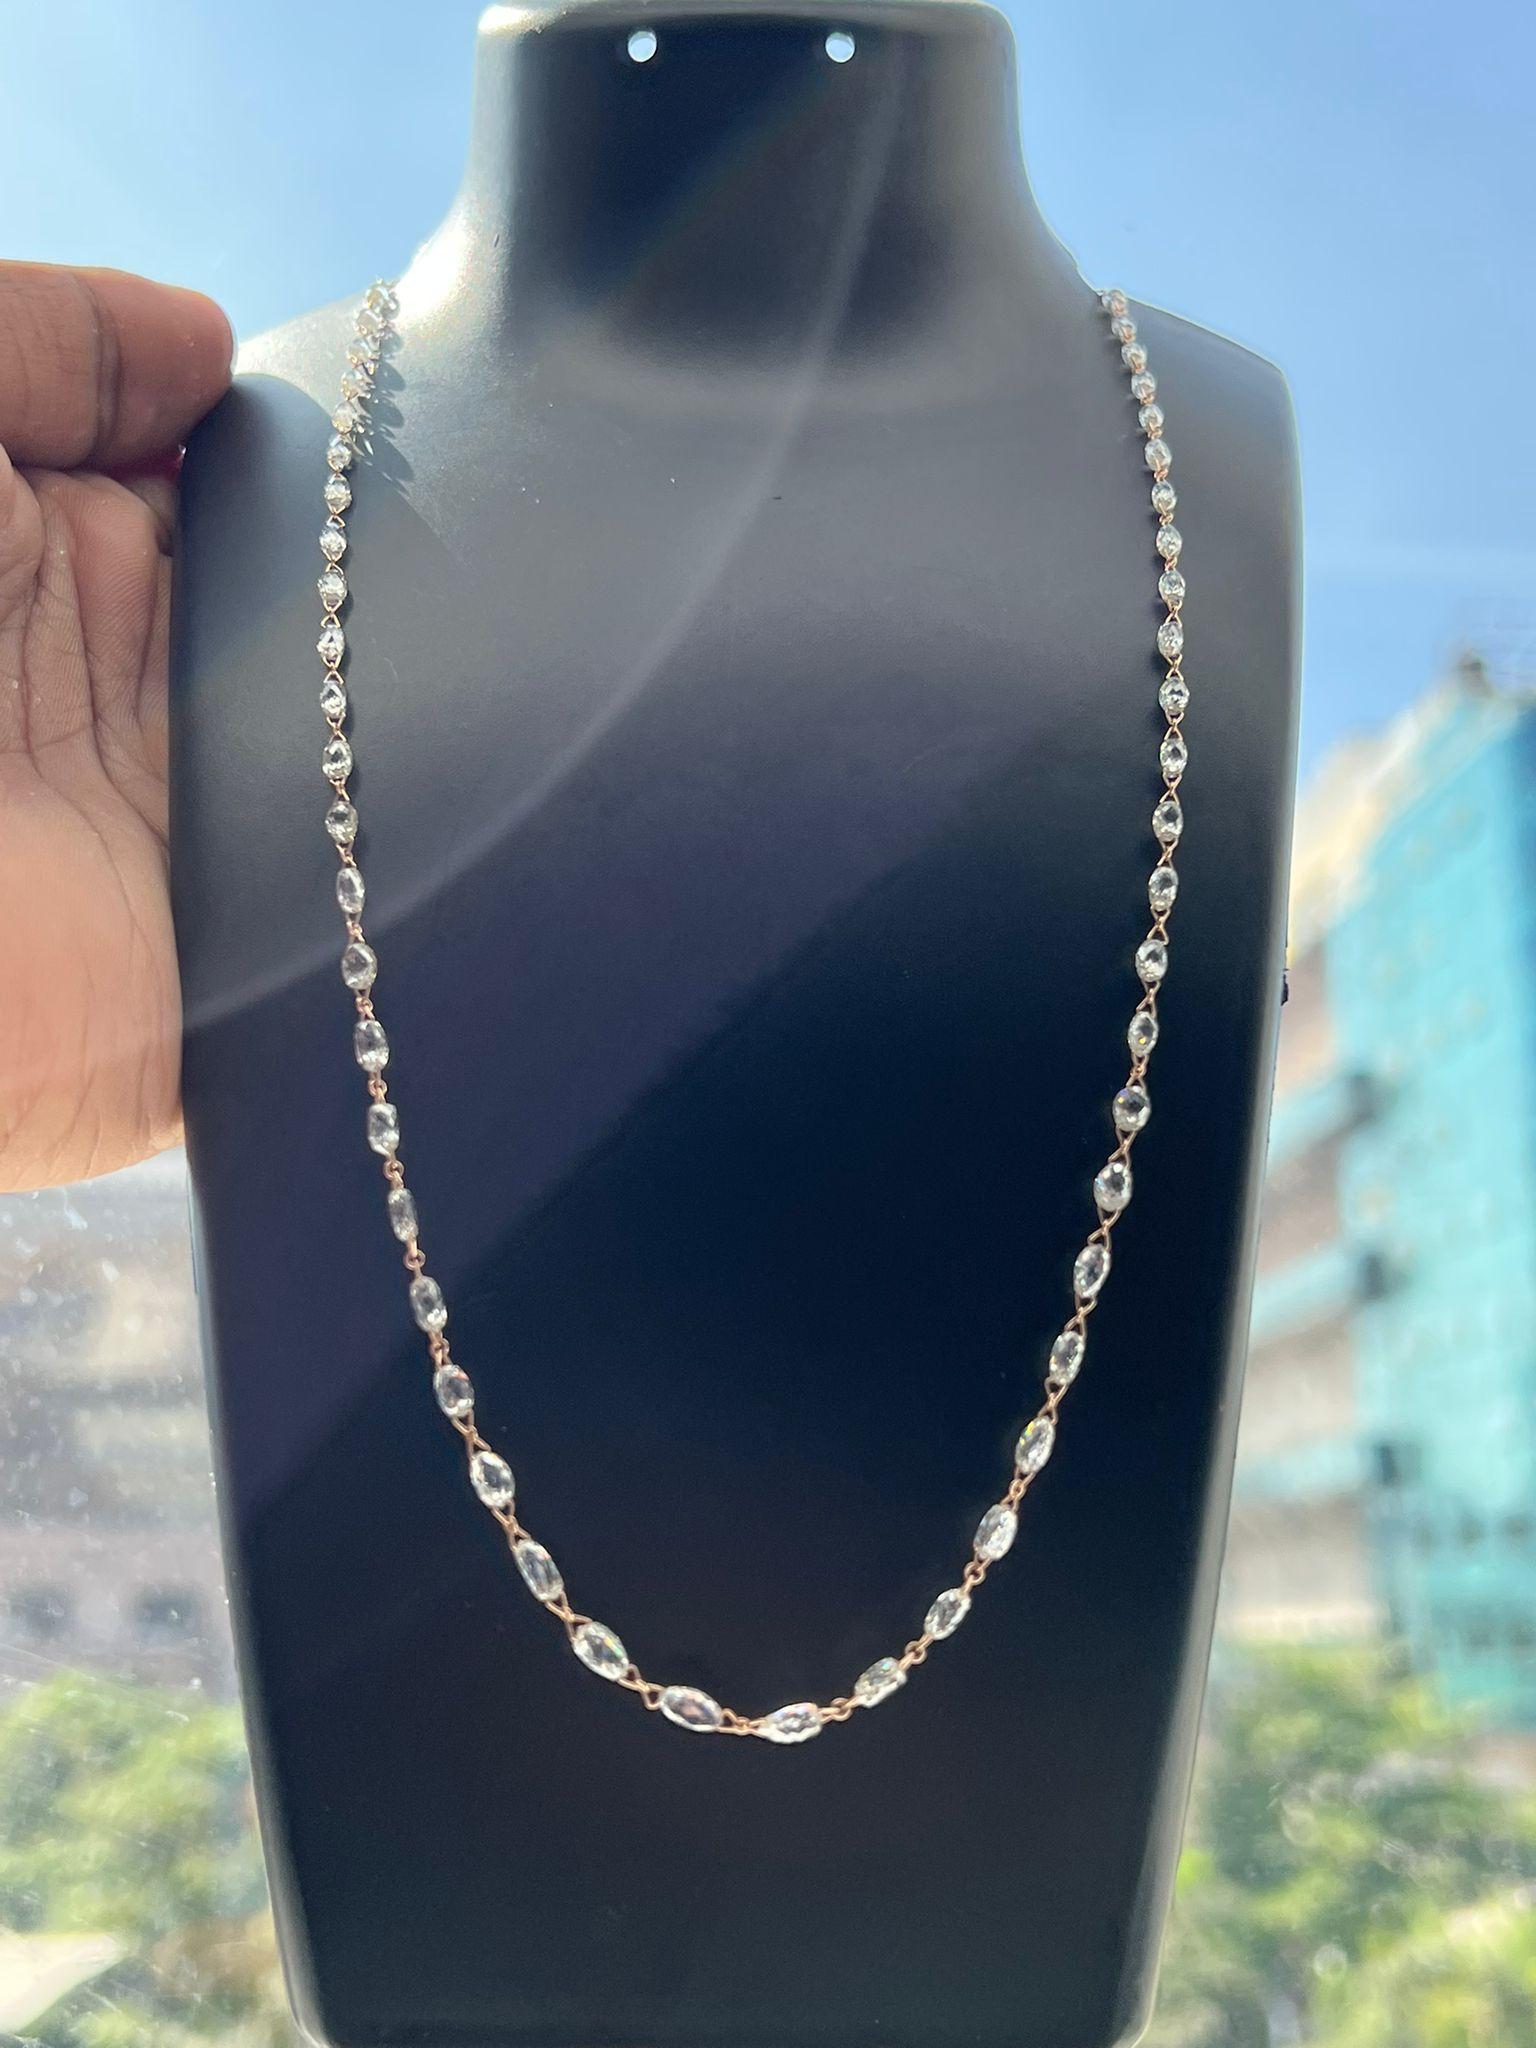 Panim 19.87 Carats Diamond Briolette Chain Necklace in 18k Yellow Gold In New Condition For Sale In Tsim Sha Tsui, Hong Kong